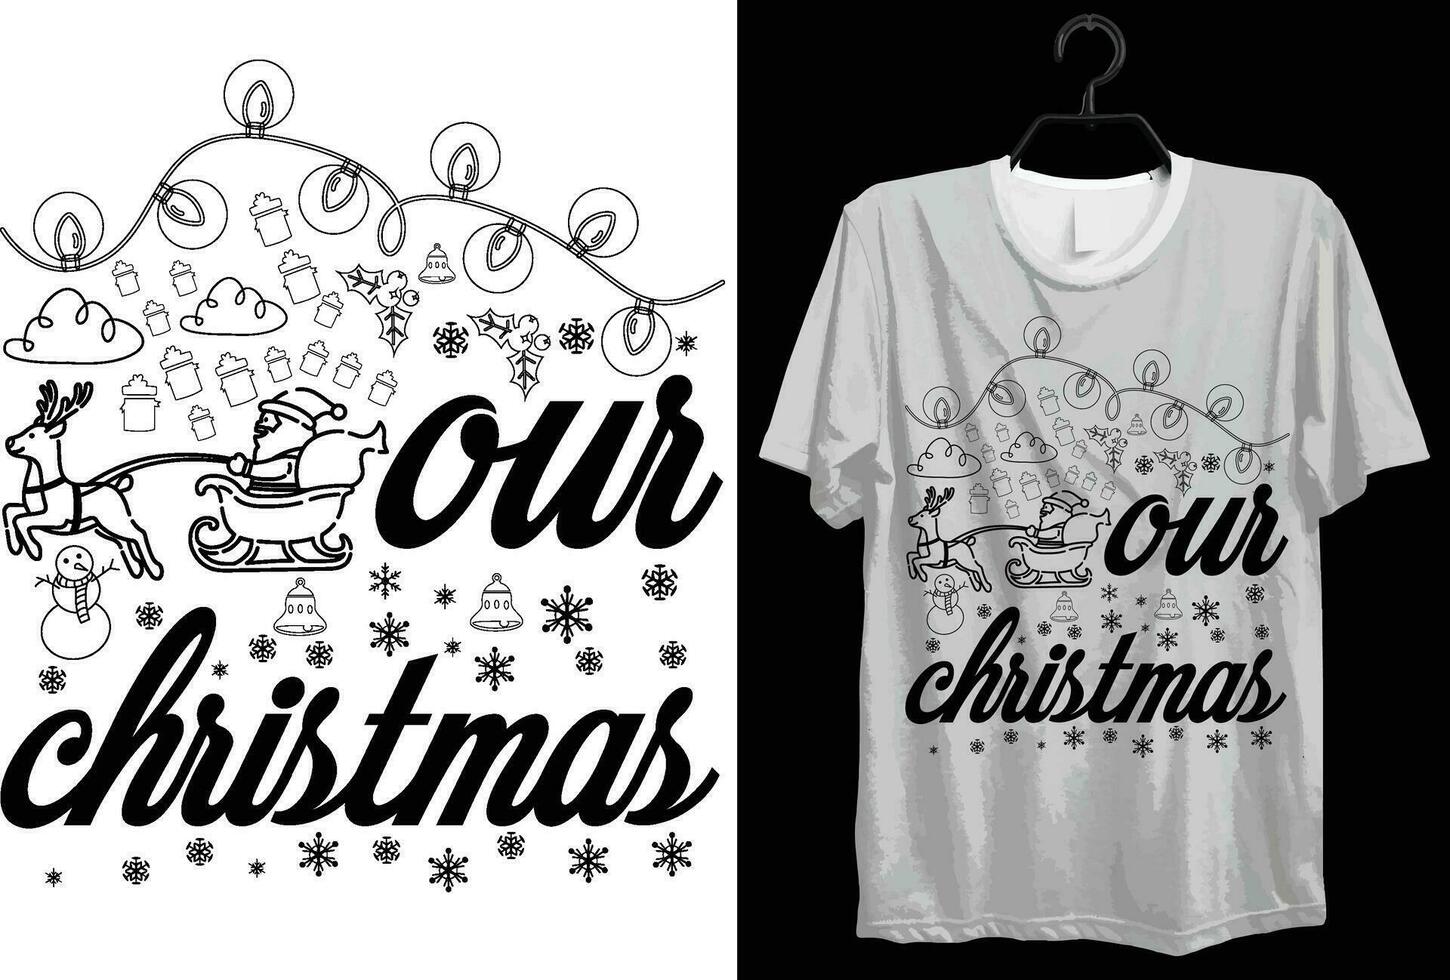 Our Christmas. Funny Gift Item Merry Christmas T-shirt Design For Christmas Lovers. vector